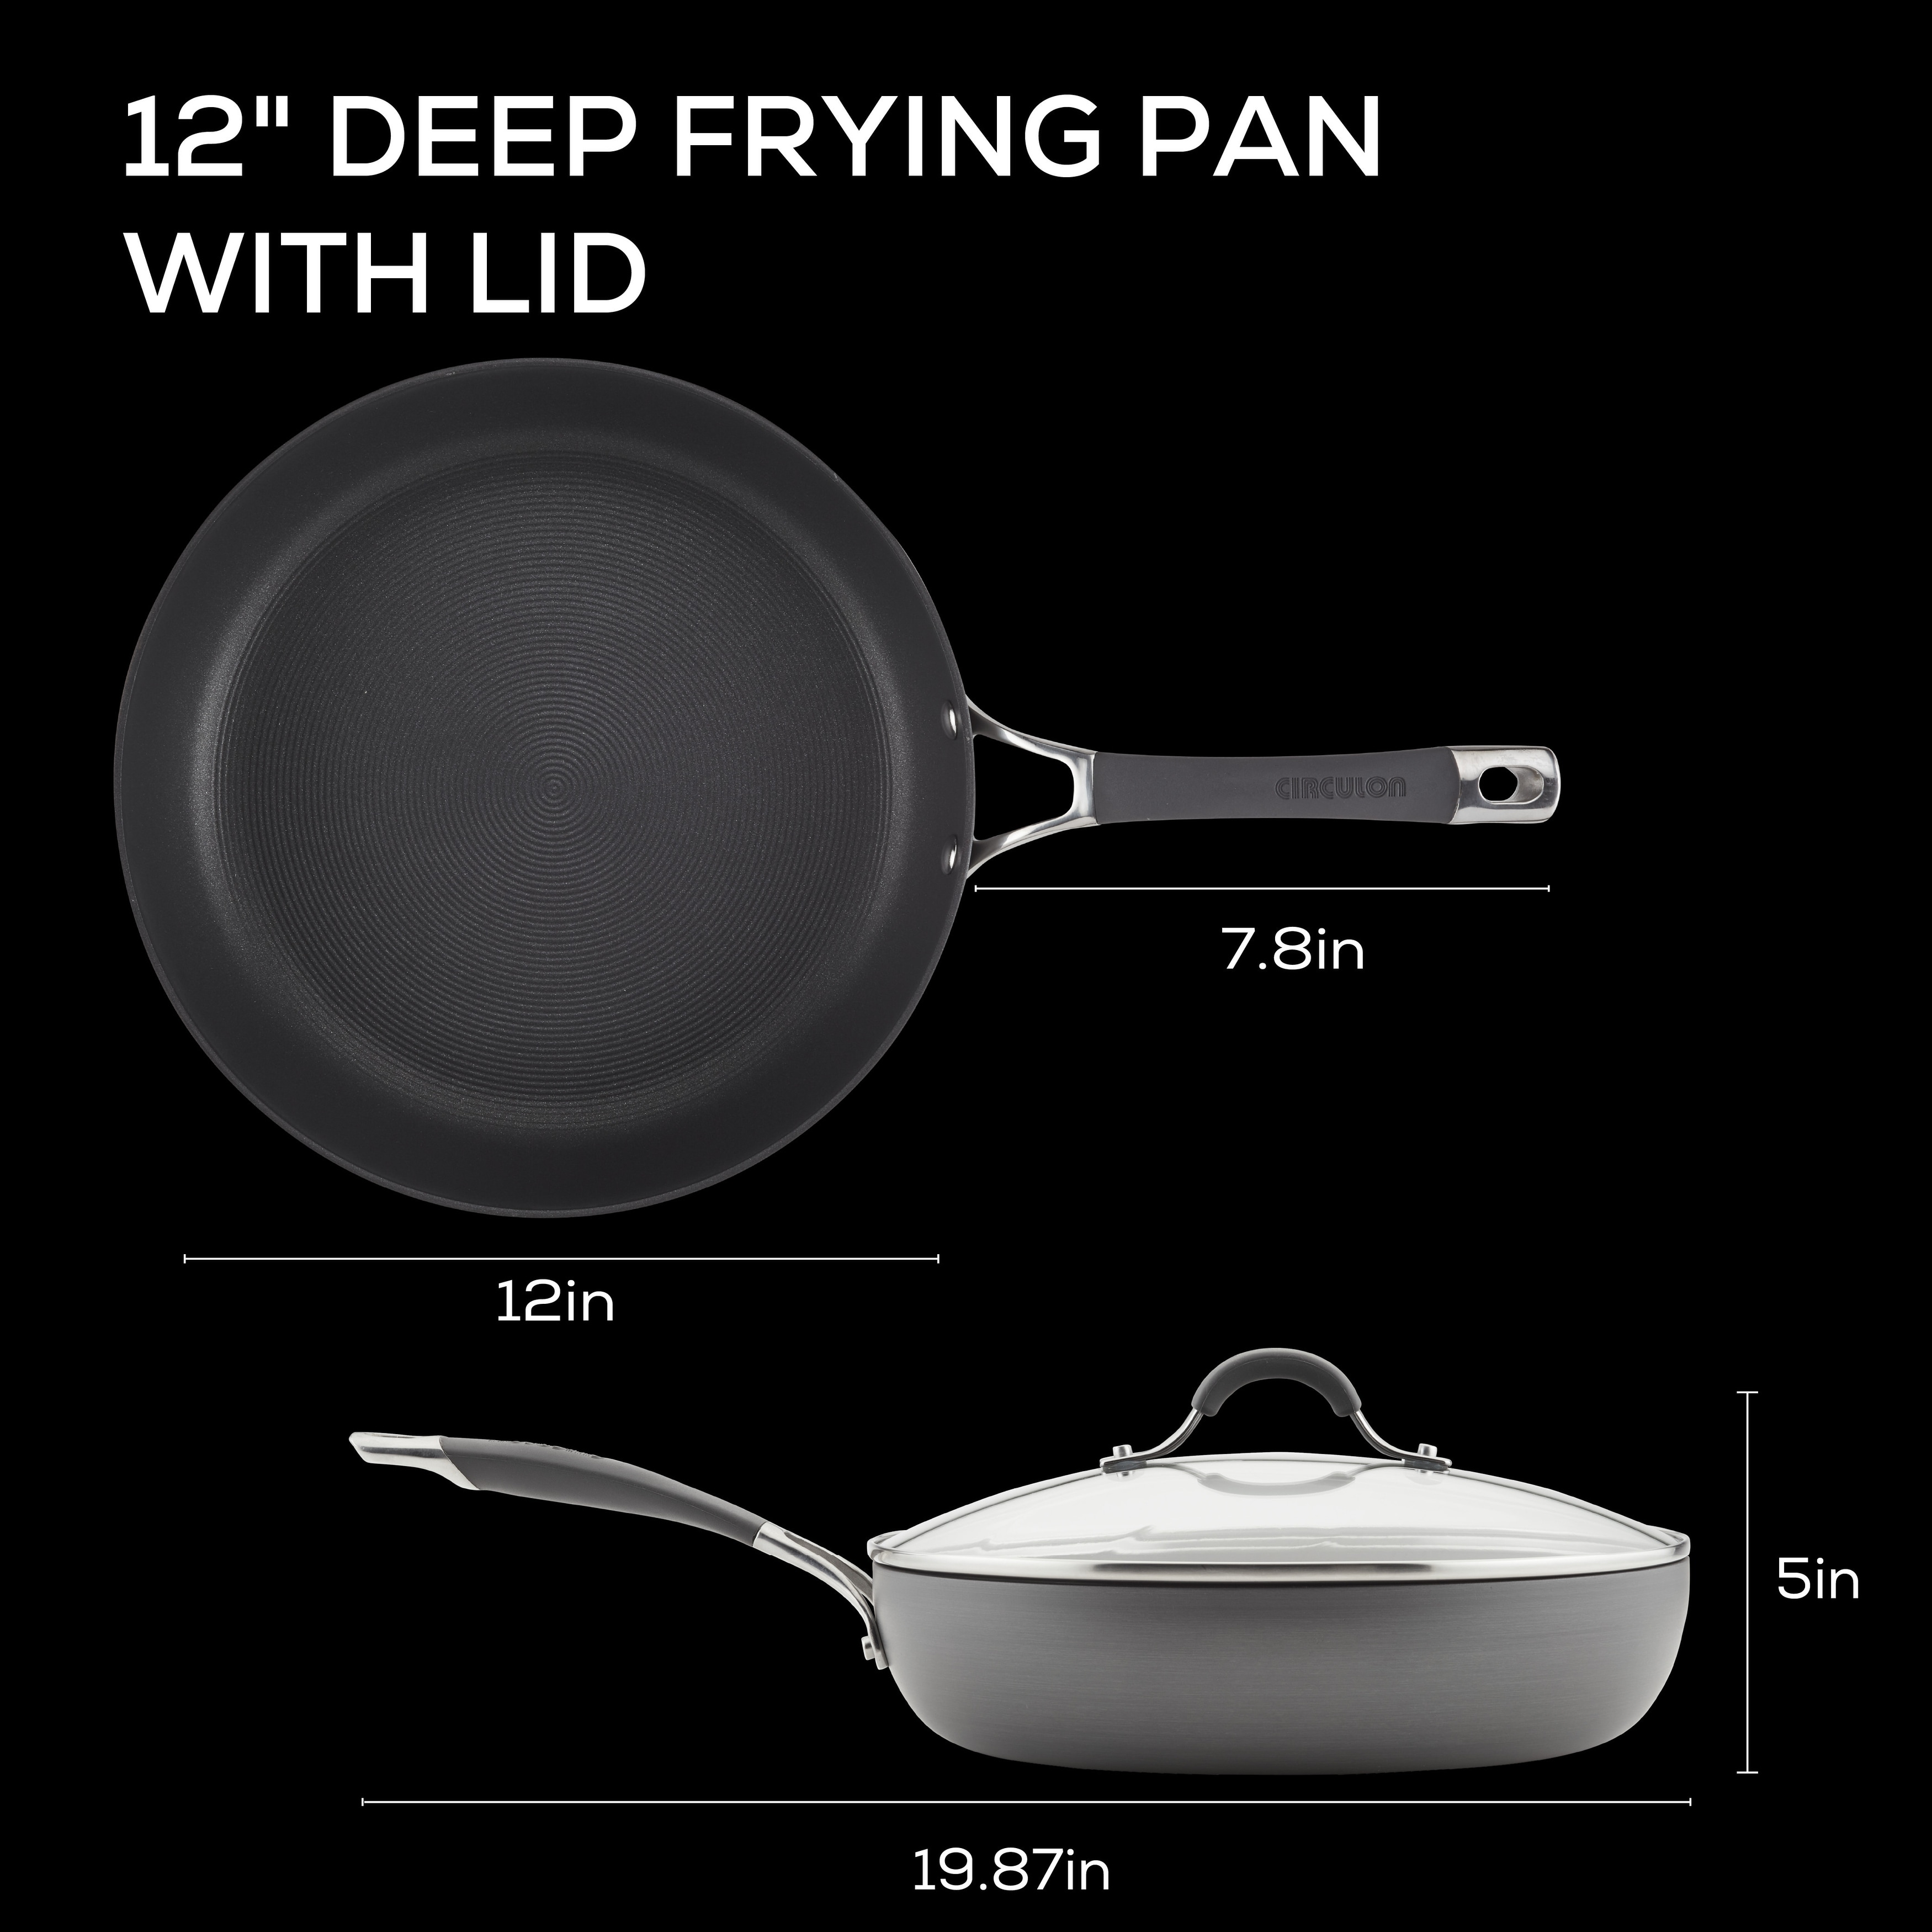 https://ak1.ostkcdn.com/images/products/is/images/direct/4062146f4be46224125b77b2315af3bf9a6b7e50/Circulon-Radiance-Hard-Anodized-Nonstick-Deep-Frying-Pan-with-Lid%2C-12-Inch%2C-Gray.jpg